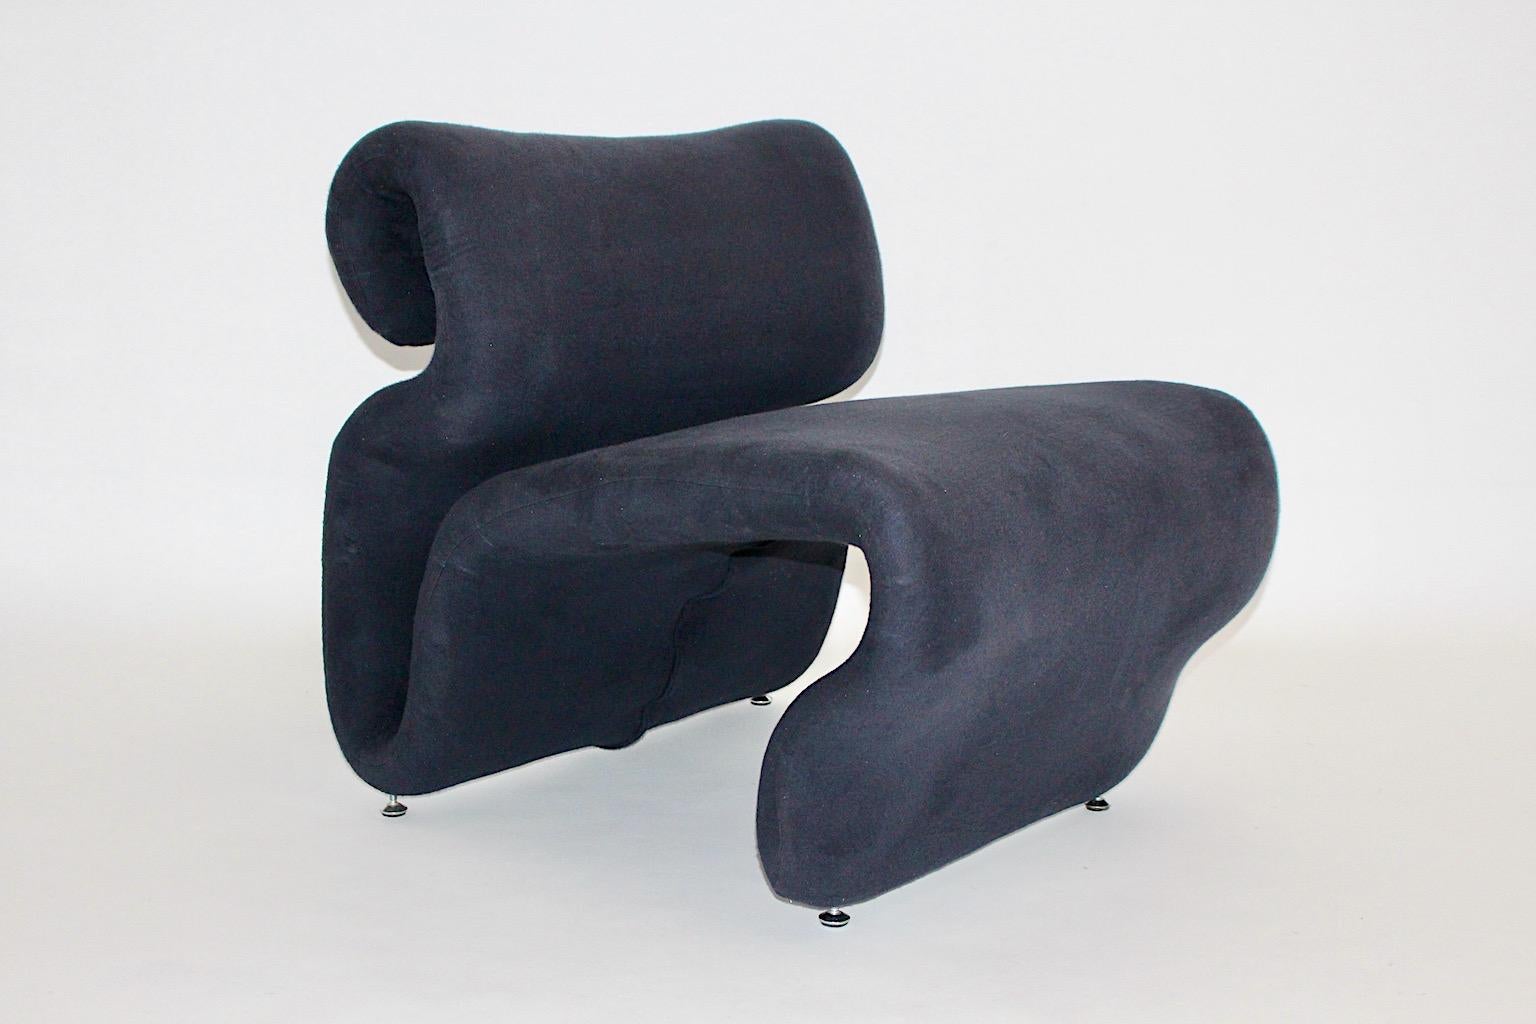 Sculptural Space Age vintage lounge chair Etcetera by Jan Ekselius from blue stretch fabric 1970s Sweden.
An amazing curved sculptural and freestanding lounge chair model Etcetera by Jan Ekselius 1970s Sweden, which comes along with an upholstered